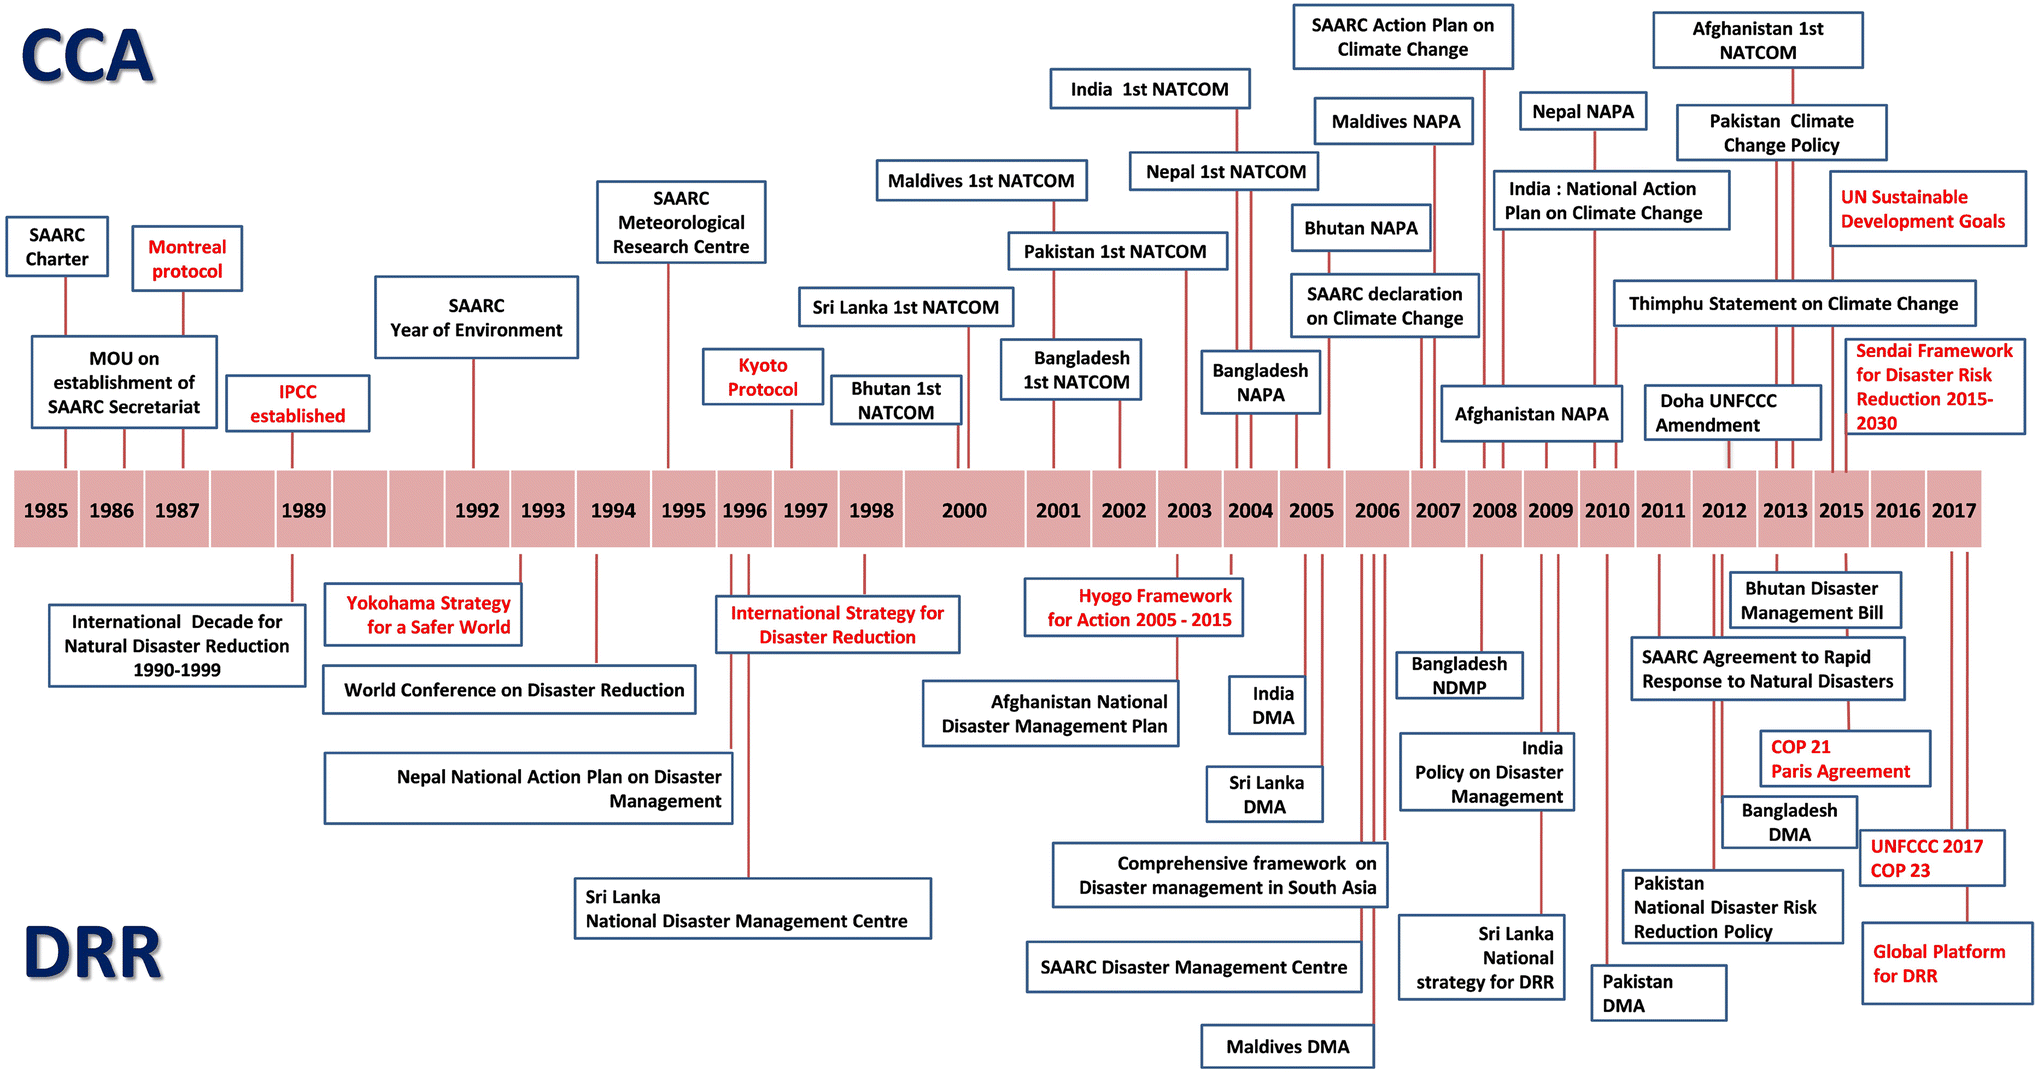 National Disaster Risk Reduction And Management Council Organizational Chart